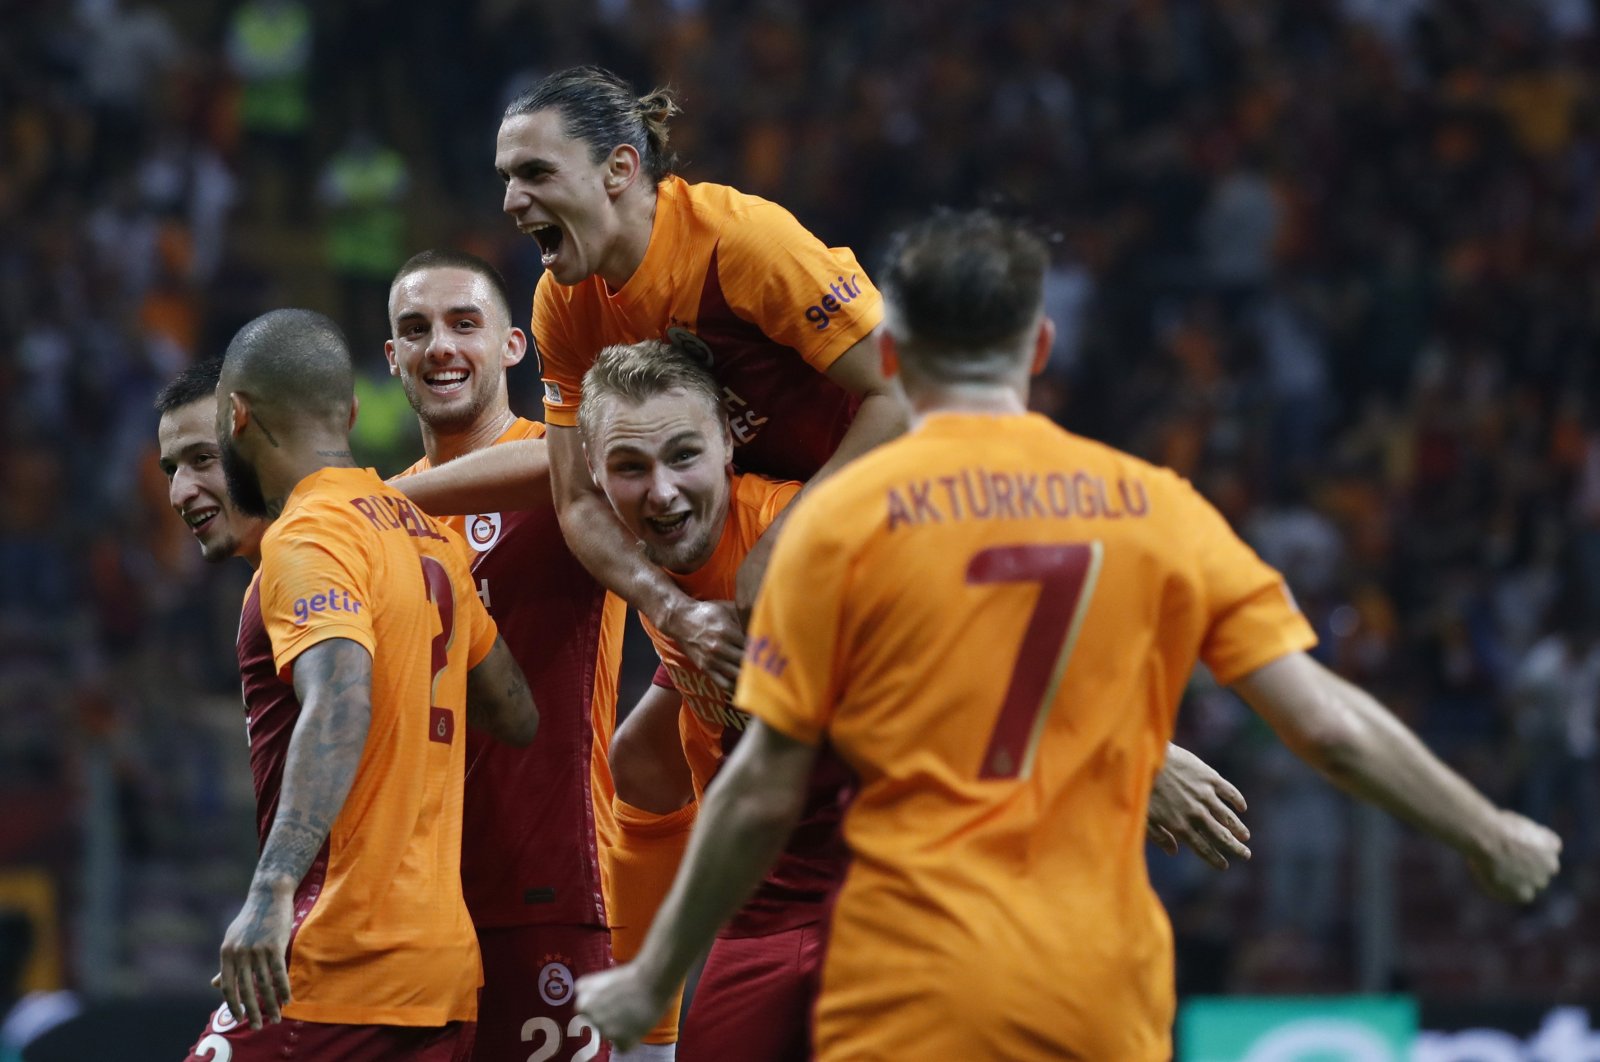 Galatasaray players celebrate their first goal, an own goal scored by Lazio, at Türk Telekom Stadium in Istanbul, Turkey, Sept. 16, 2021. (REUTERS PHOTO)